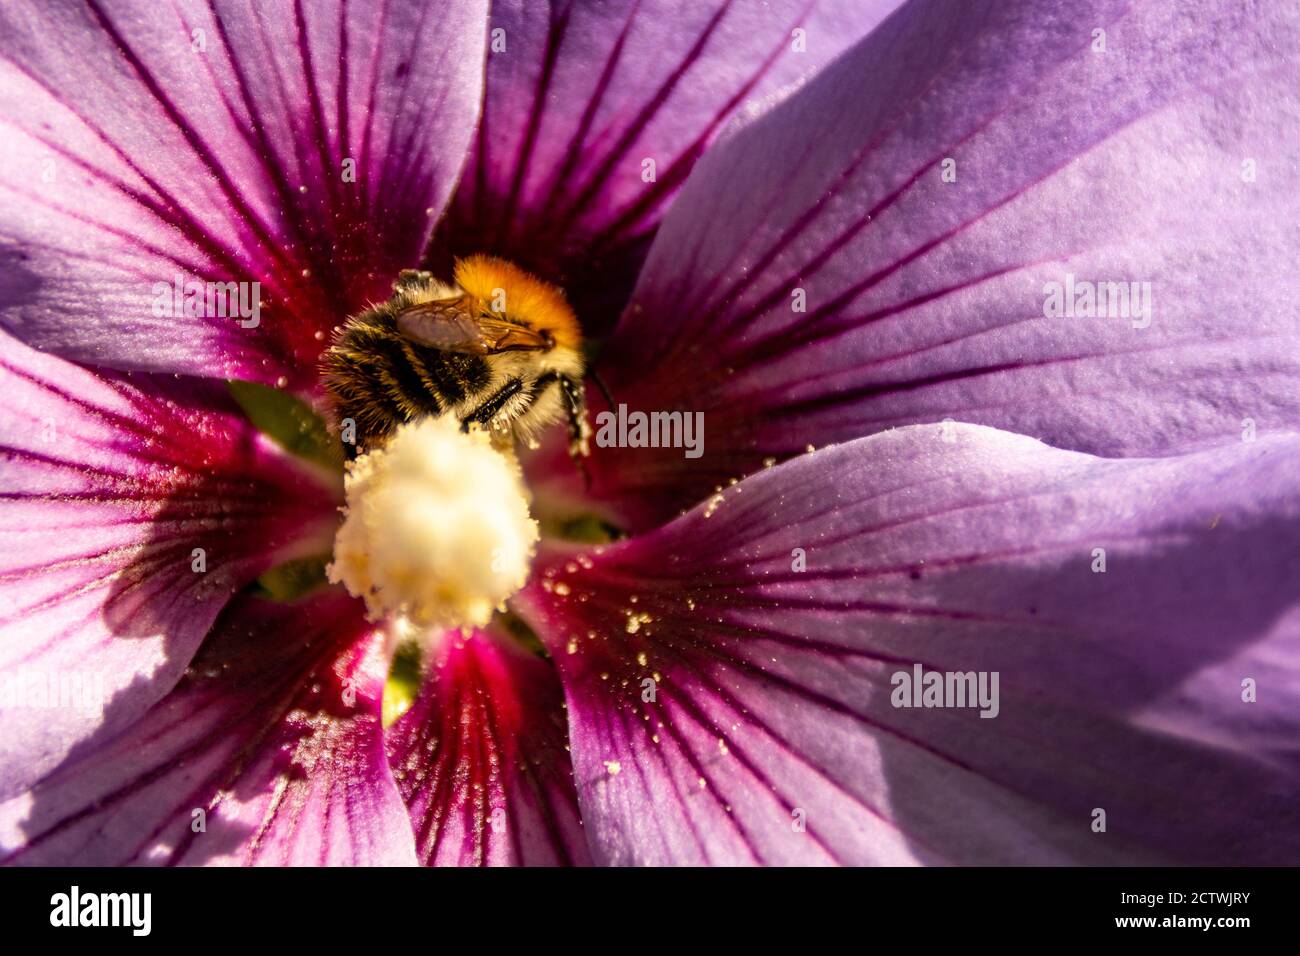 Titel A bee collects nectar from a purple flower. Macro photo. Summer love insects feed on nectar. pictures all the fine details of the insect. flyin Stock Photo